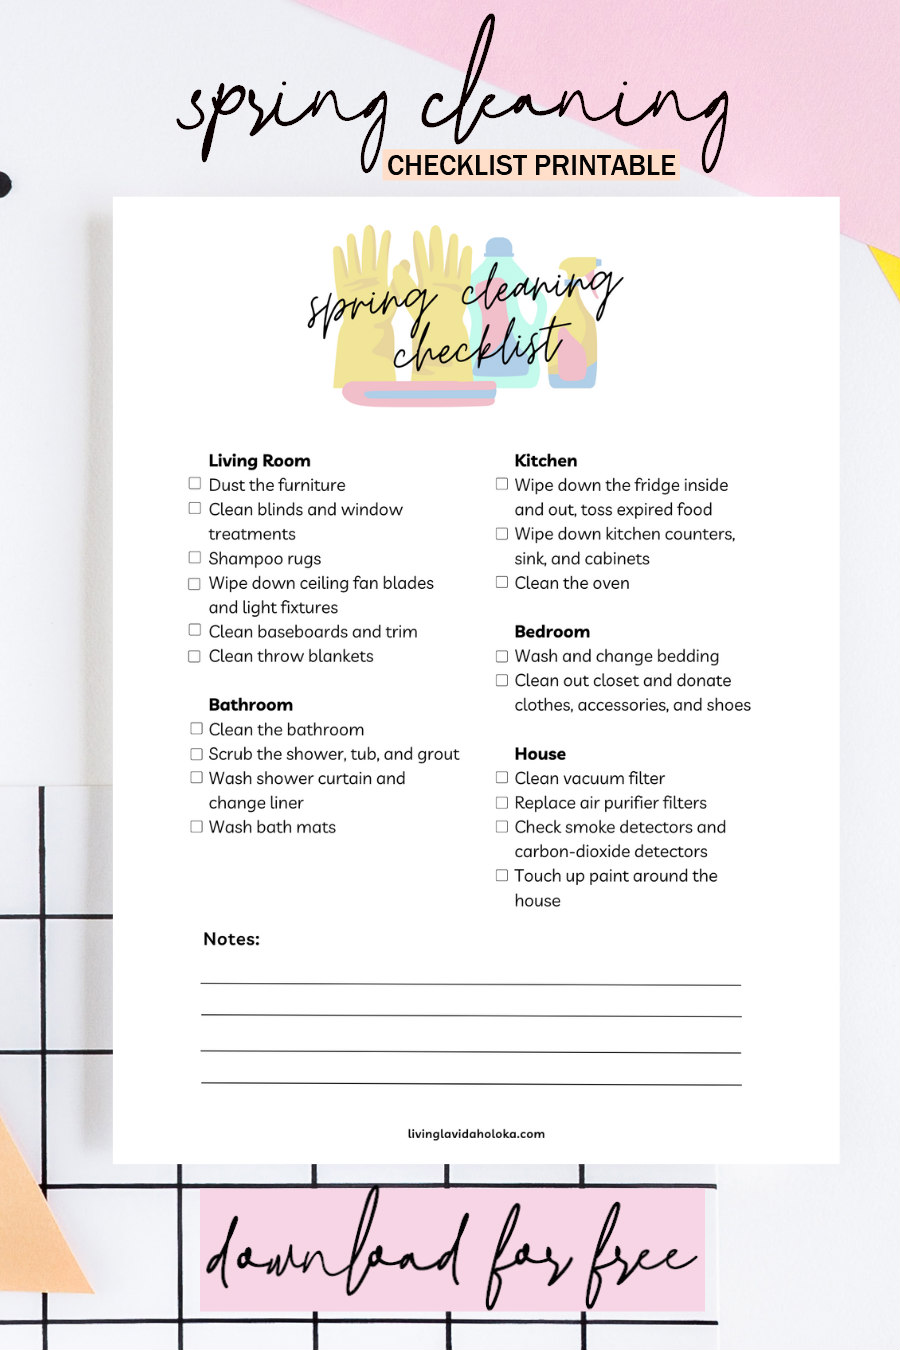 Spring Cleaning Checklist Printable - download for free